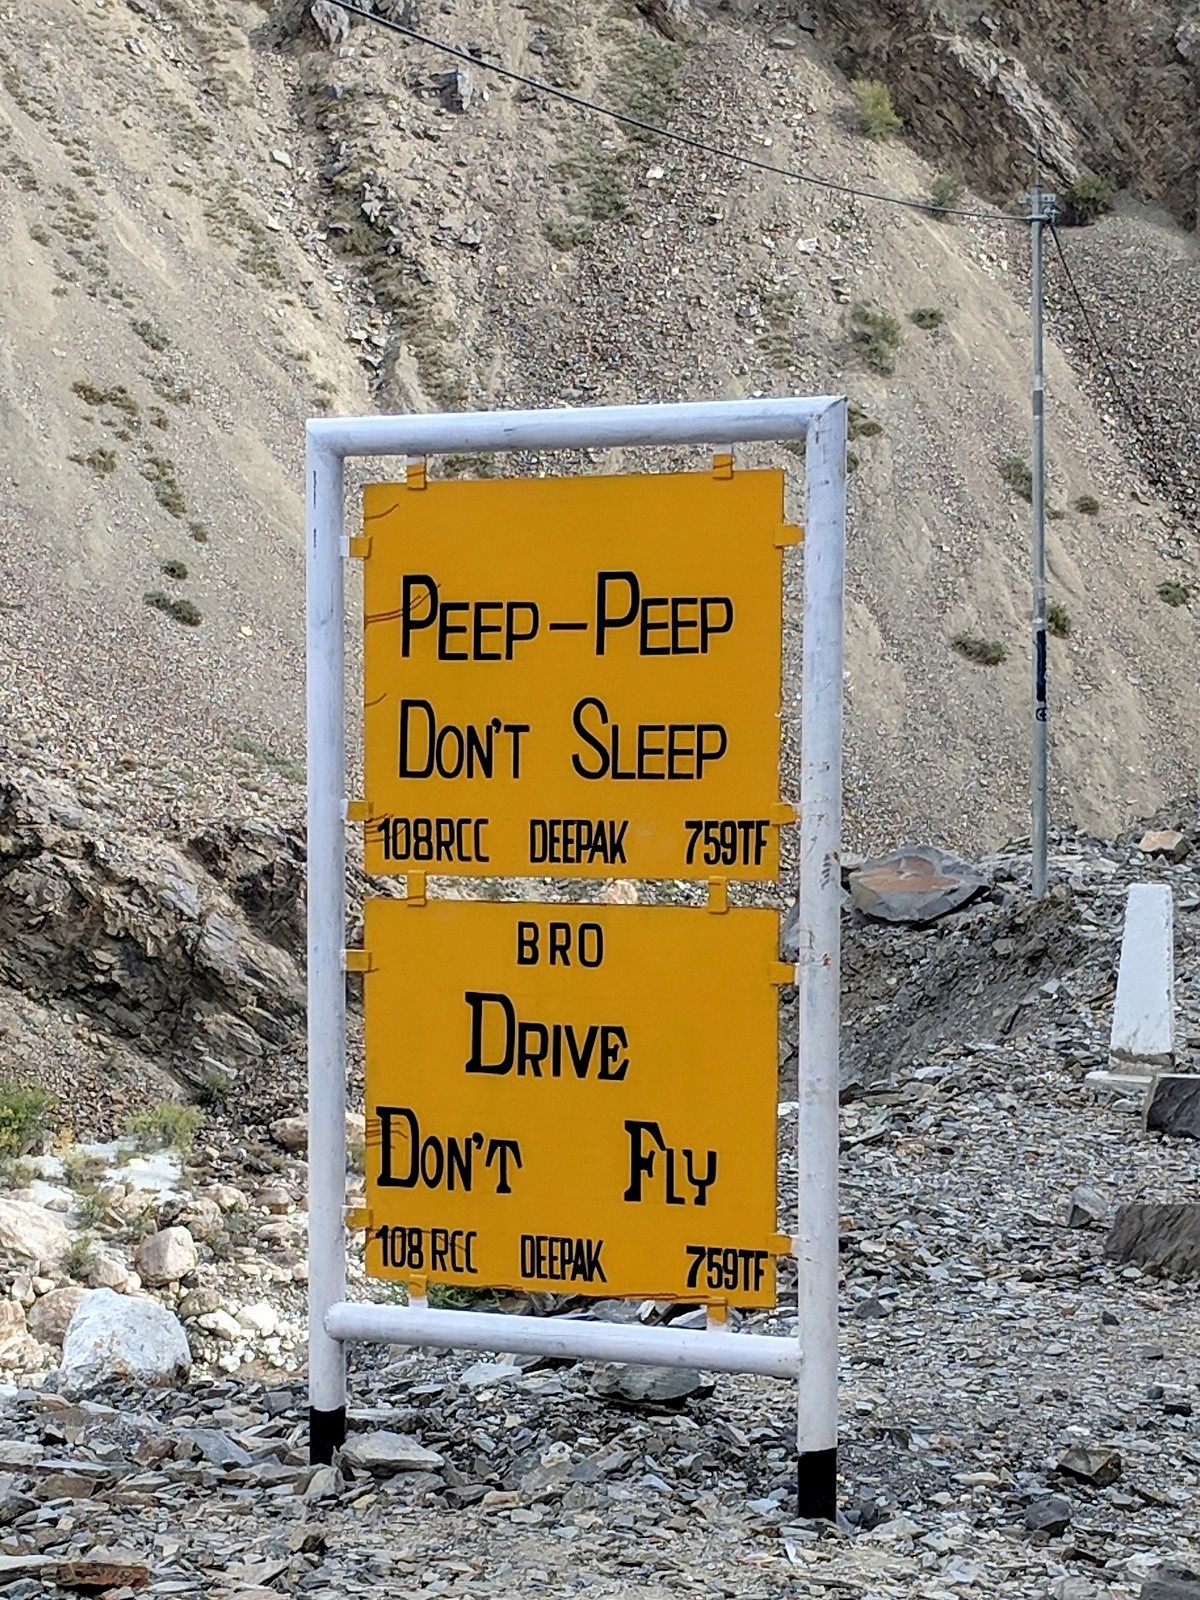 A roadside sign with Peep Peep Don't Sleep, Drive Don't Fly